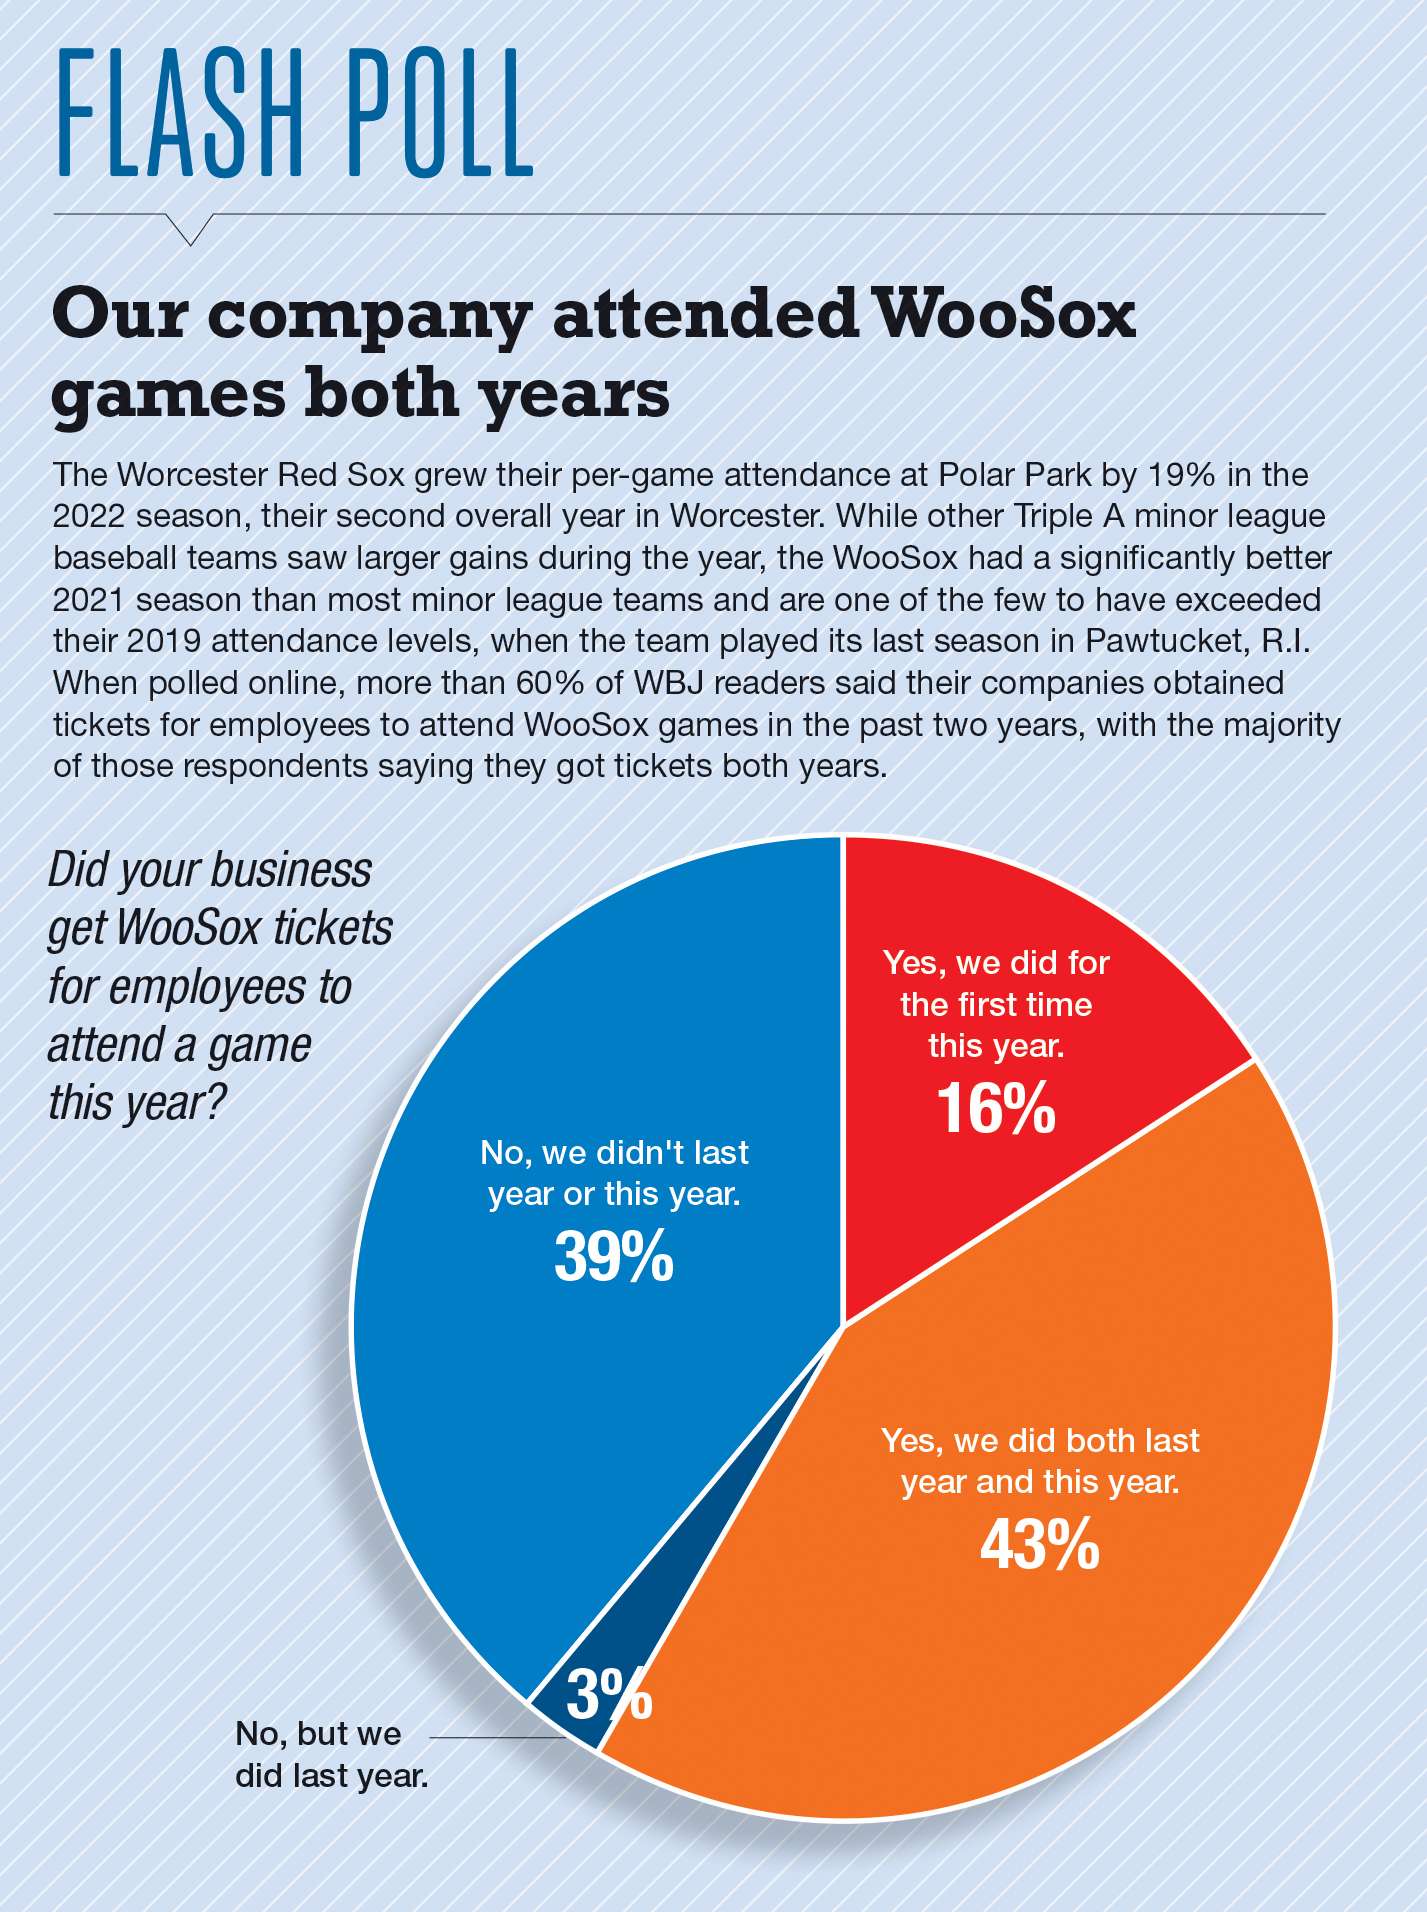 WooSox finish second season ranked 6th in attendance, with 19 increase